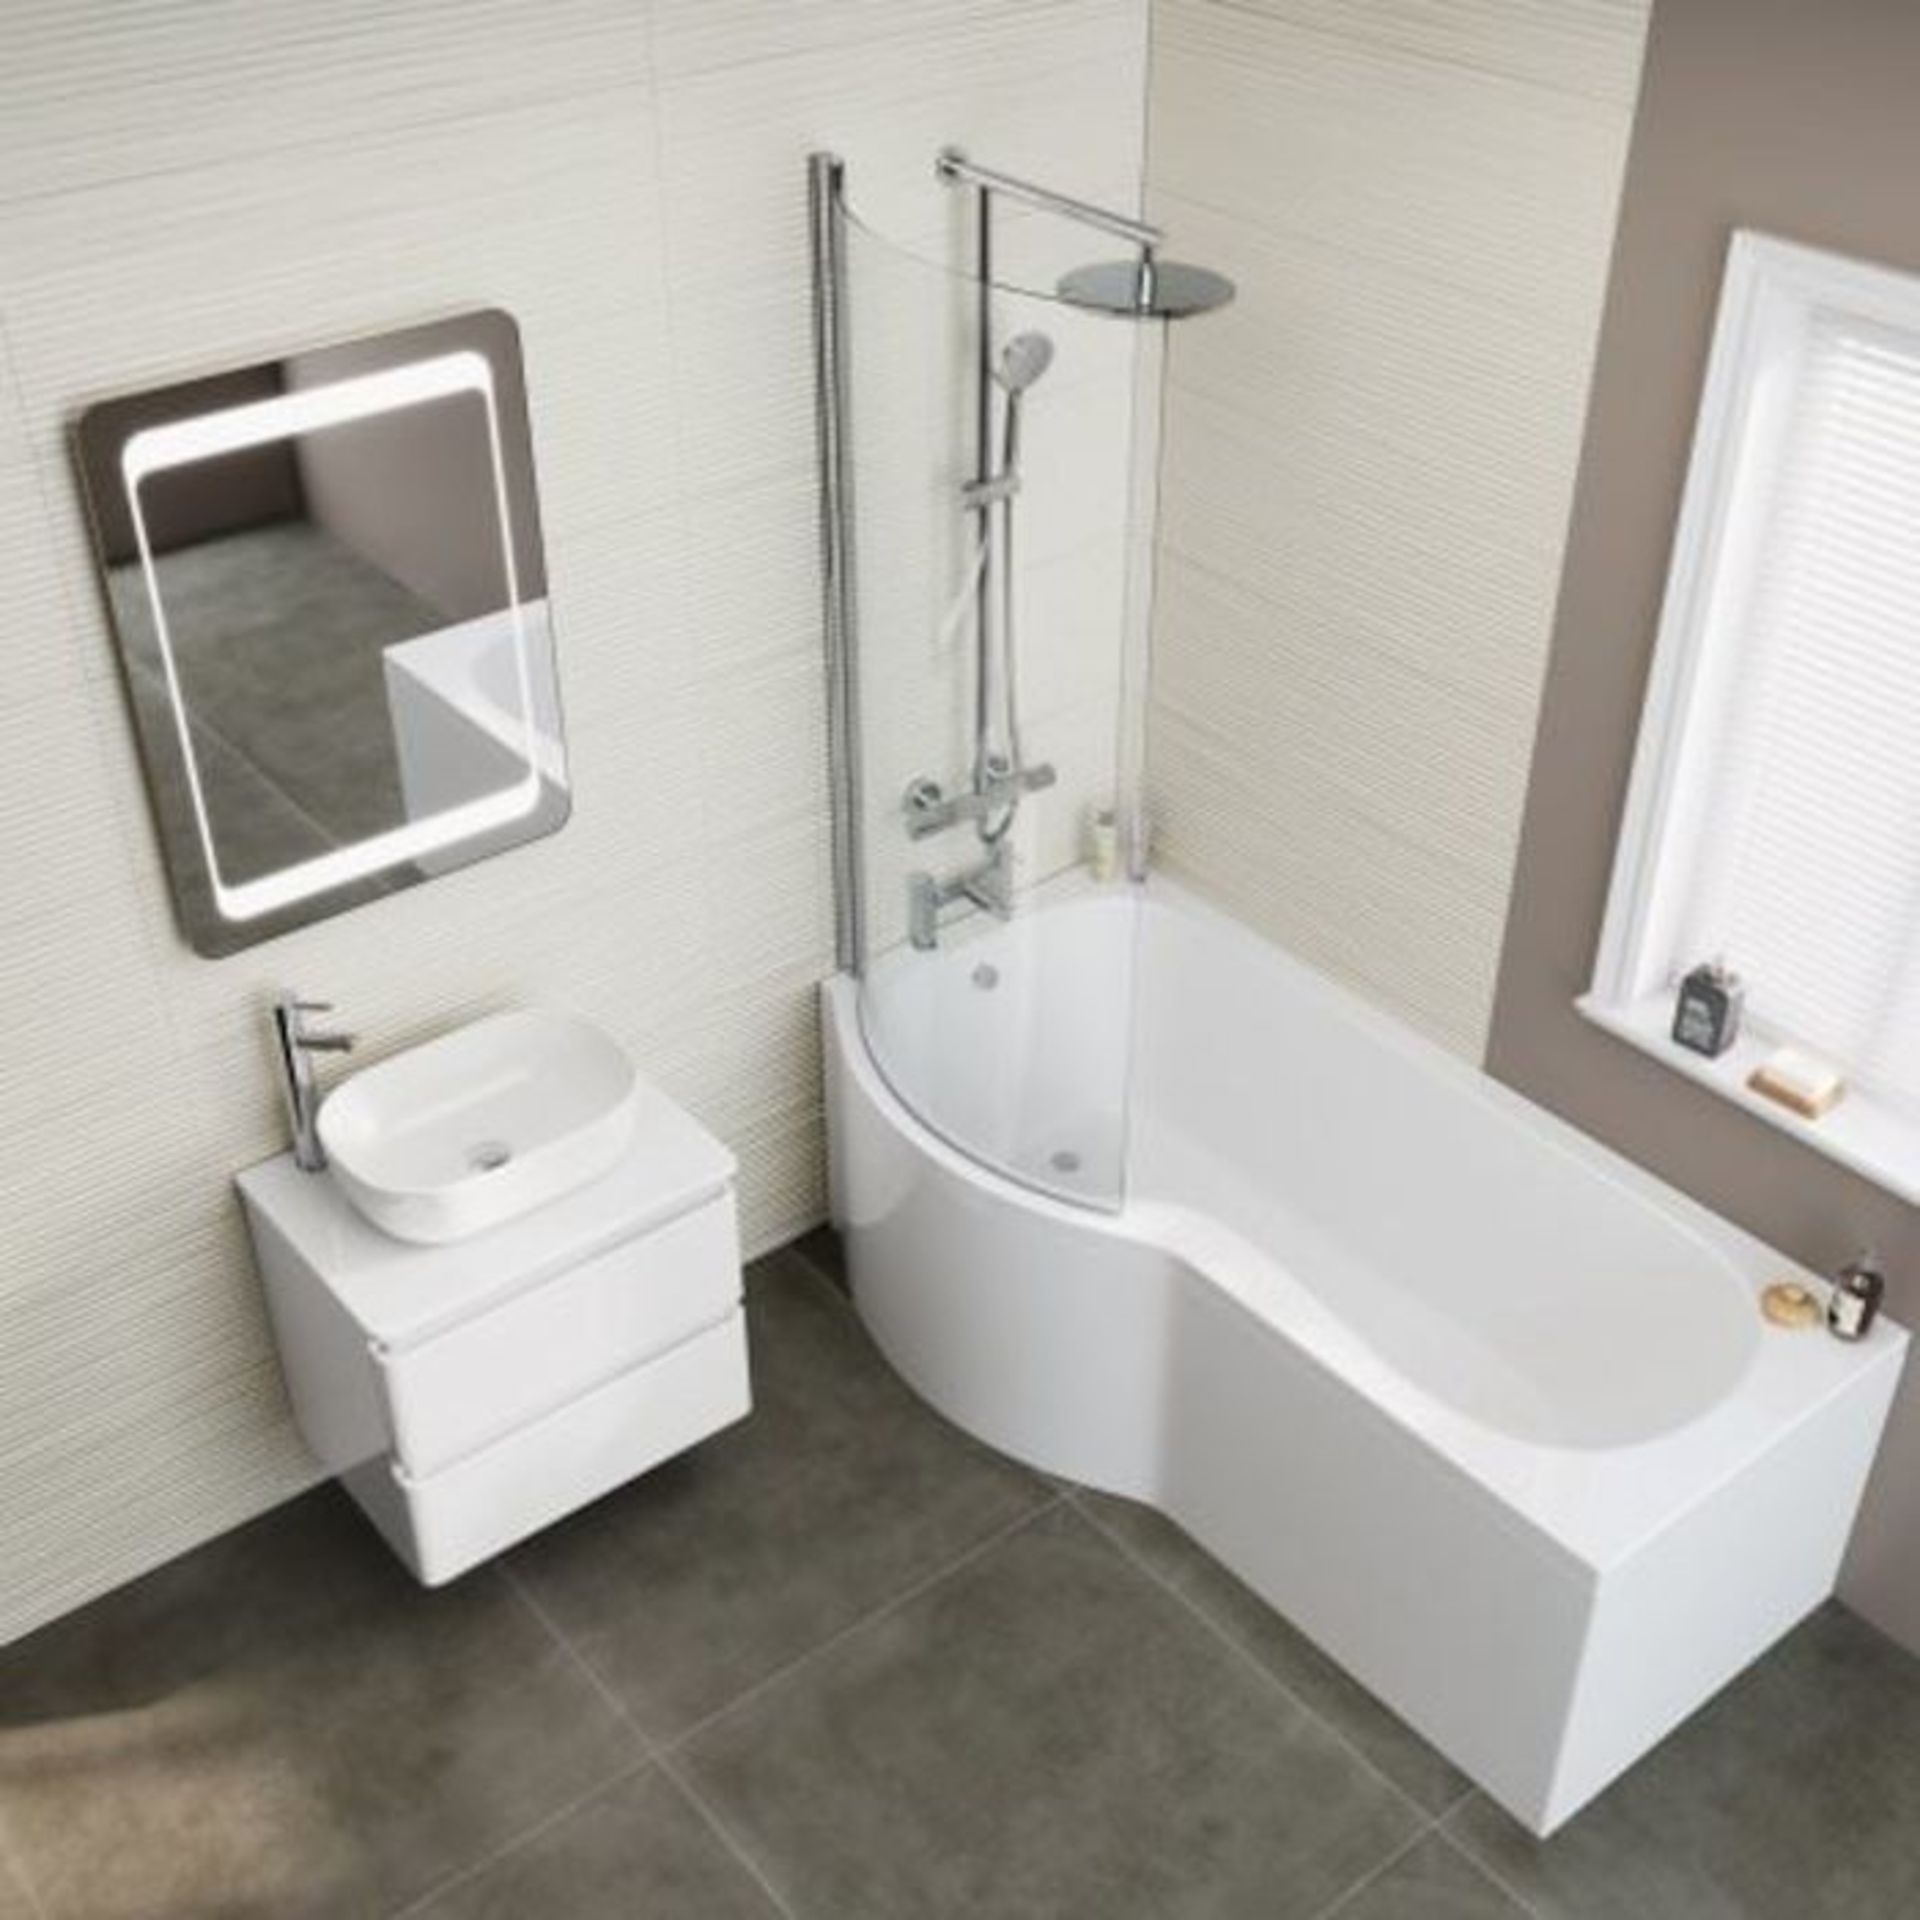 (CT44) 1700x850mm - Left Hand P-Shaped Bath with Front Panel (Excludes End Panel). RRP £339.99. - Image 3 of 3